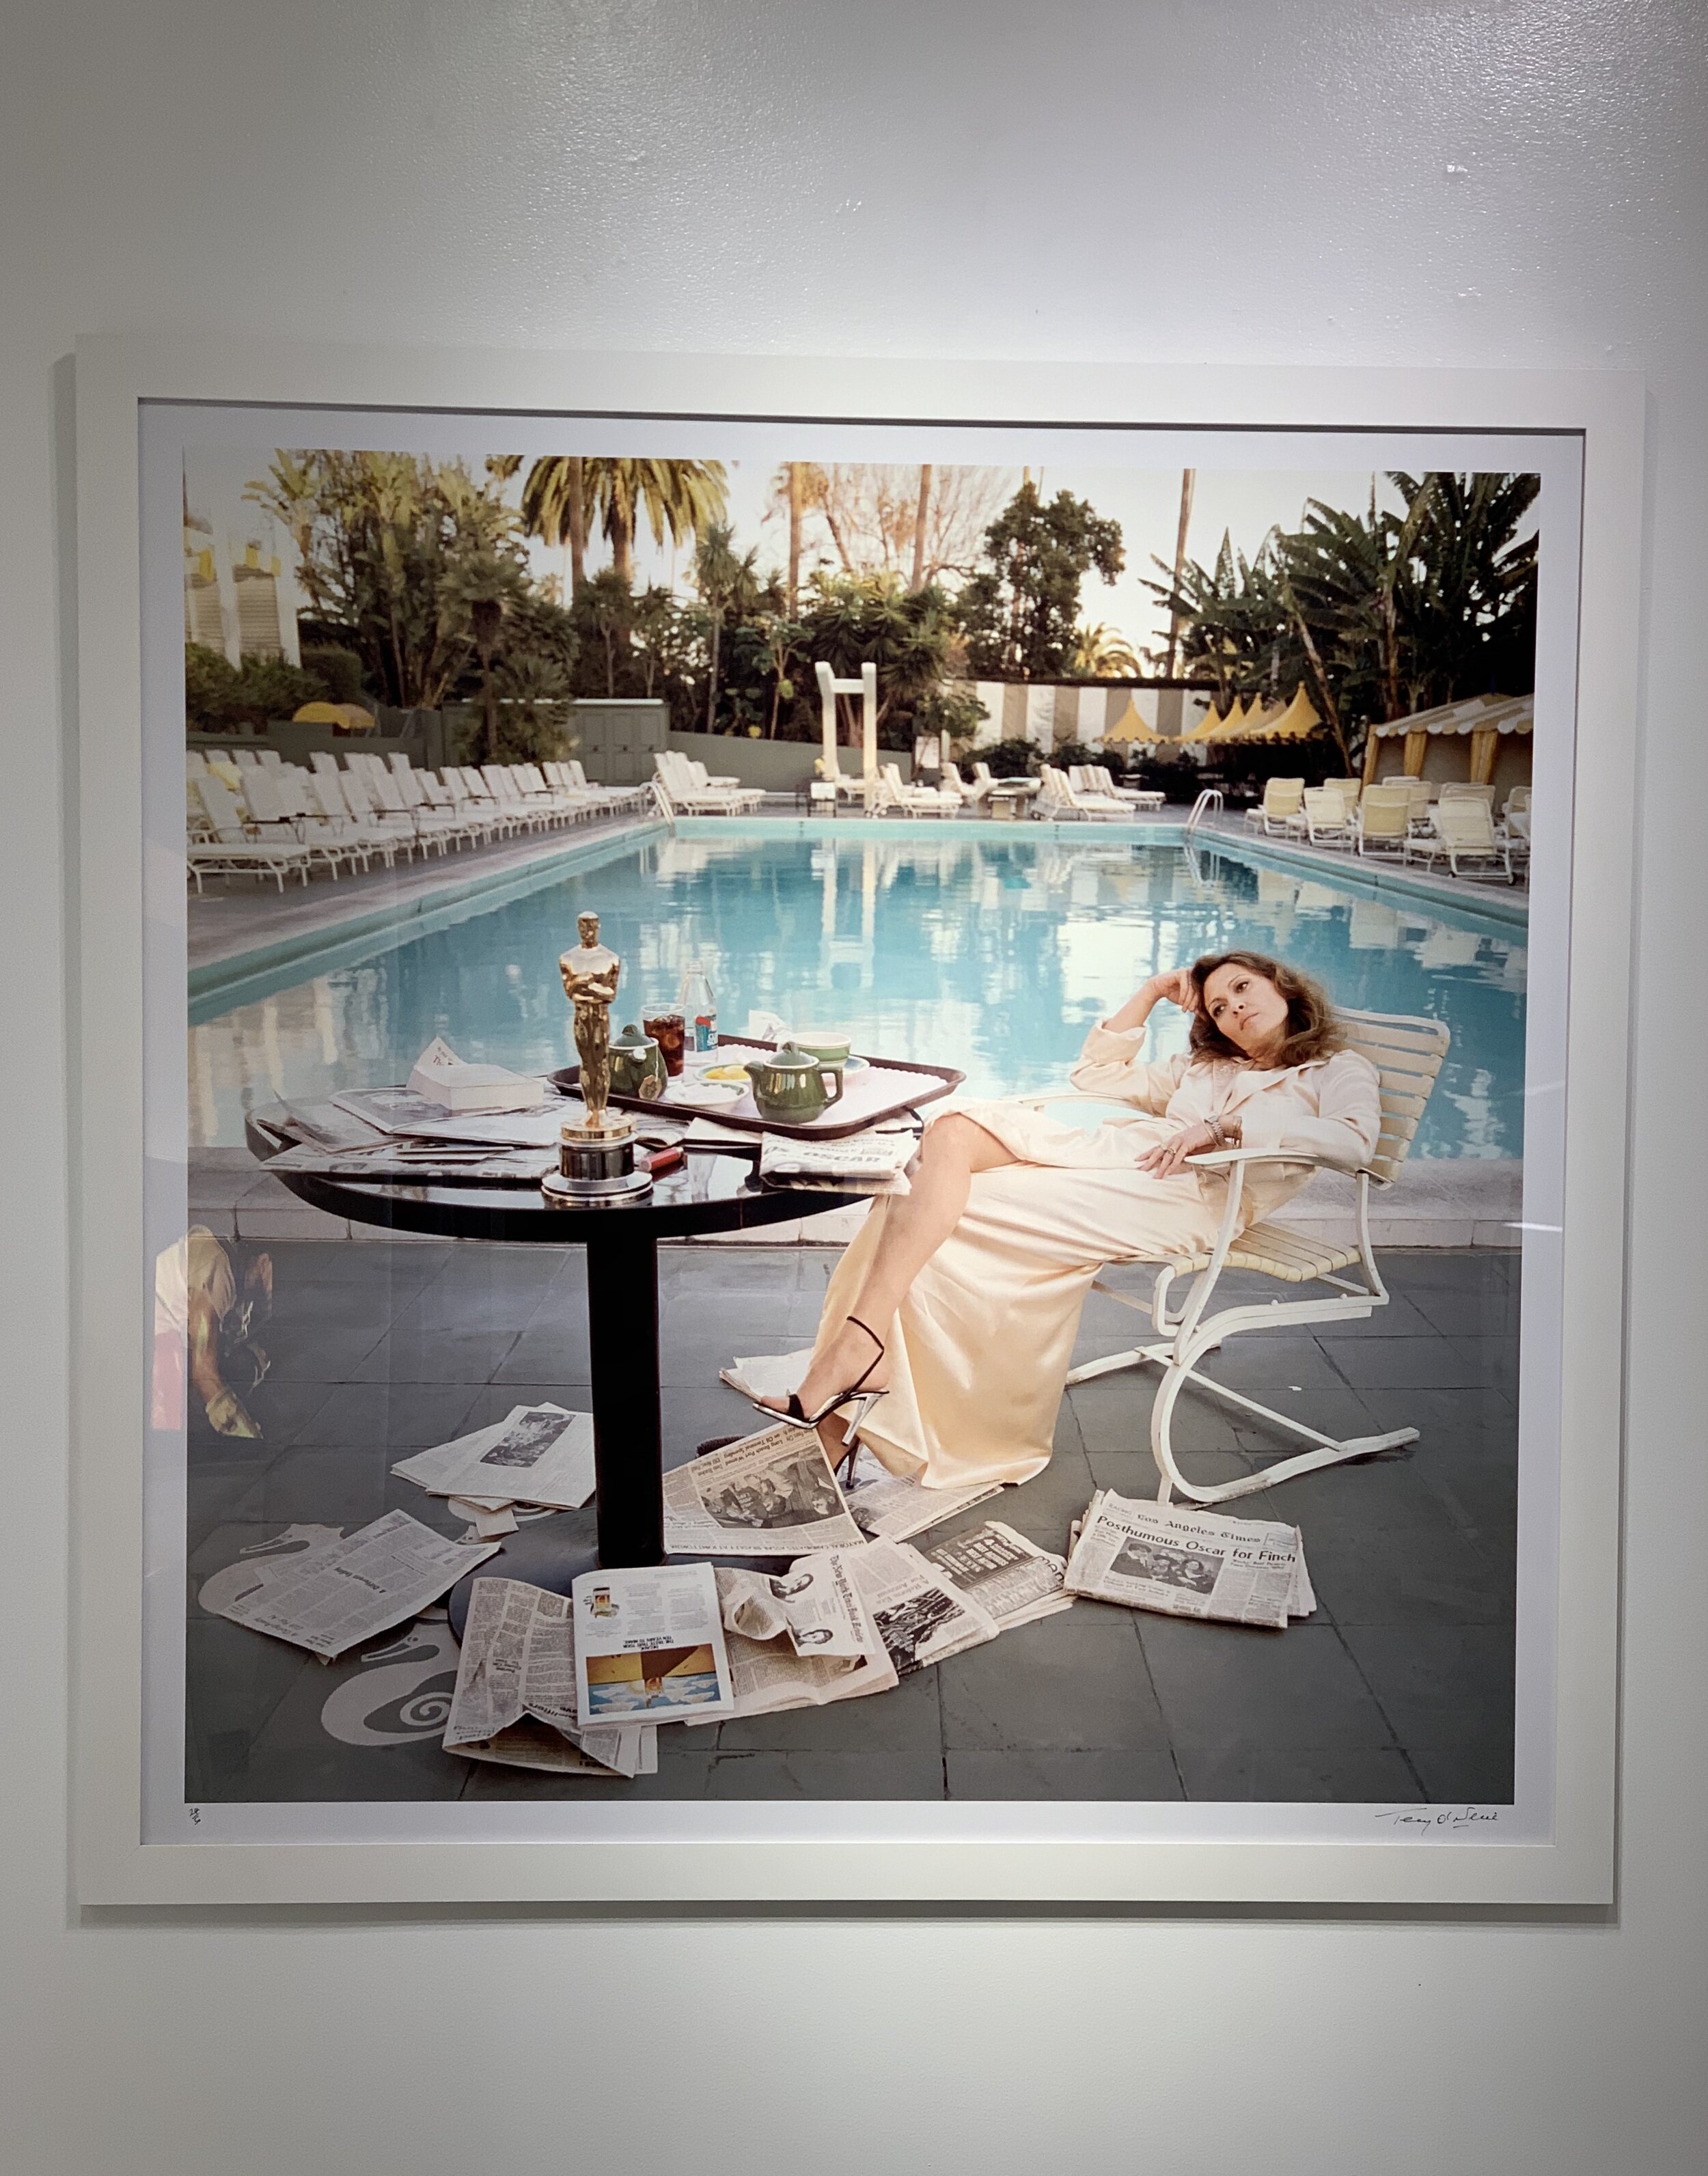 Limited Edition Faye Dunaway 'Oscar Outtake' taken by Terry O'Neill